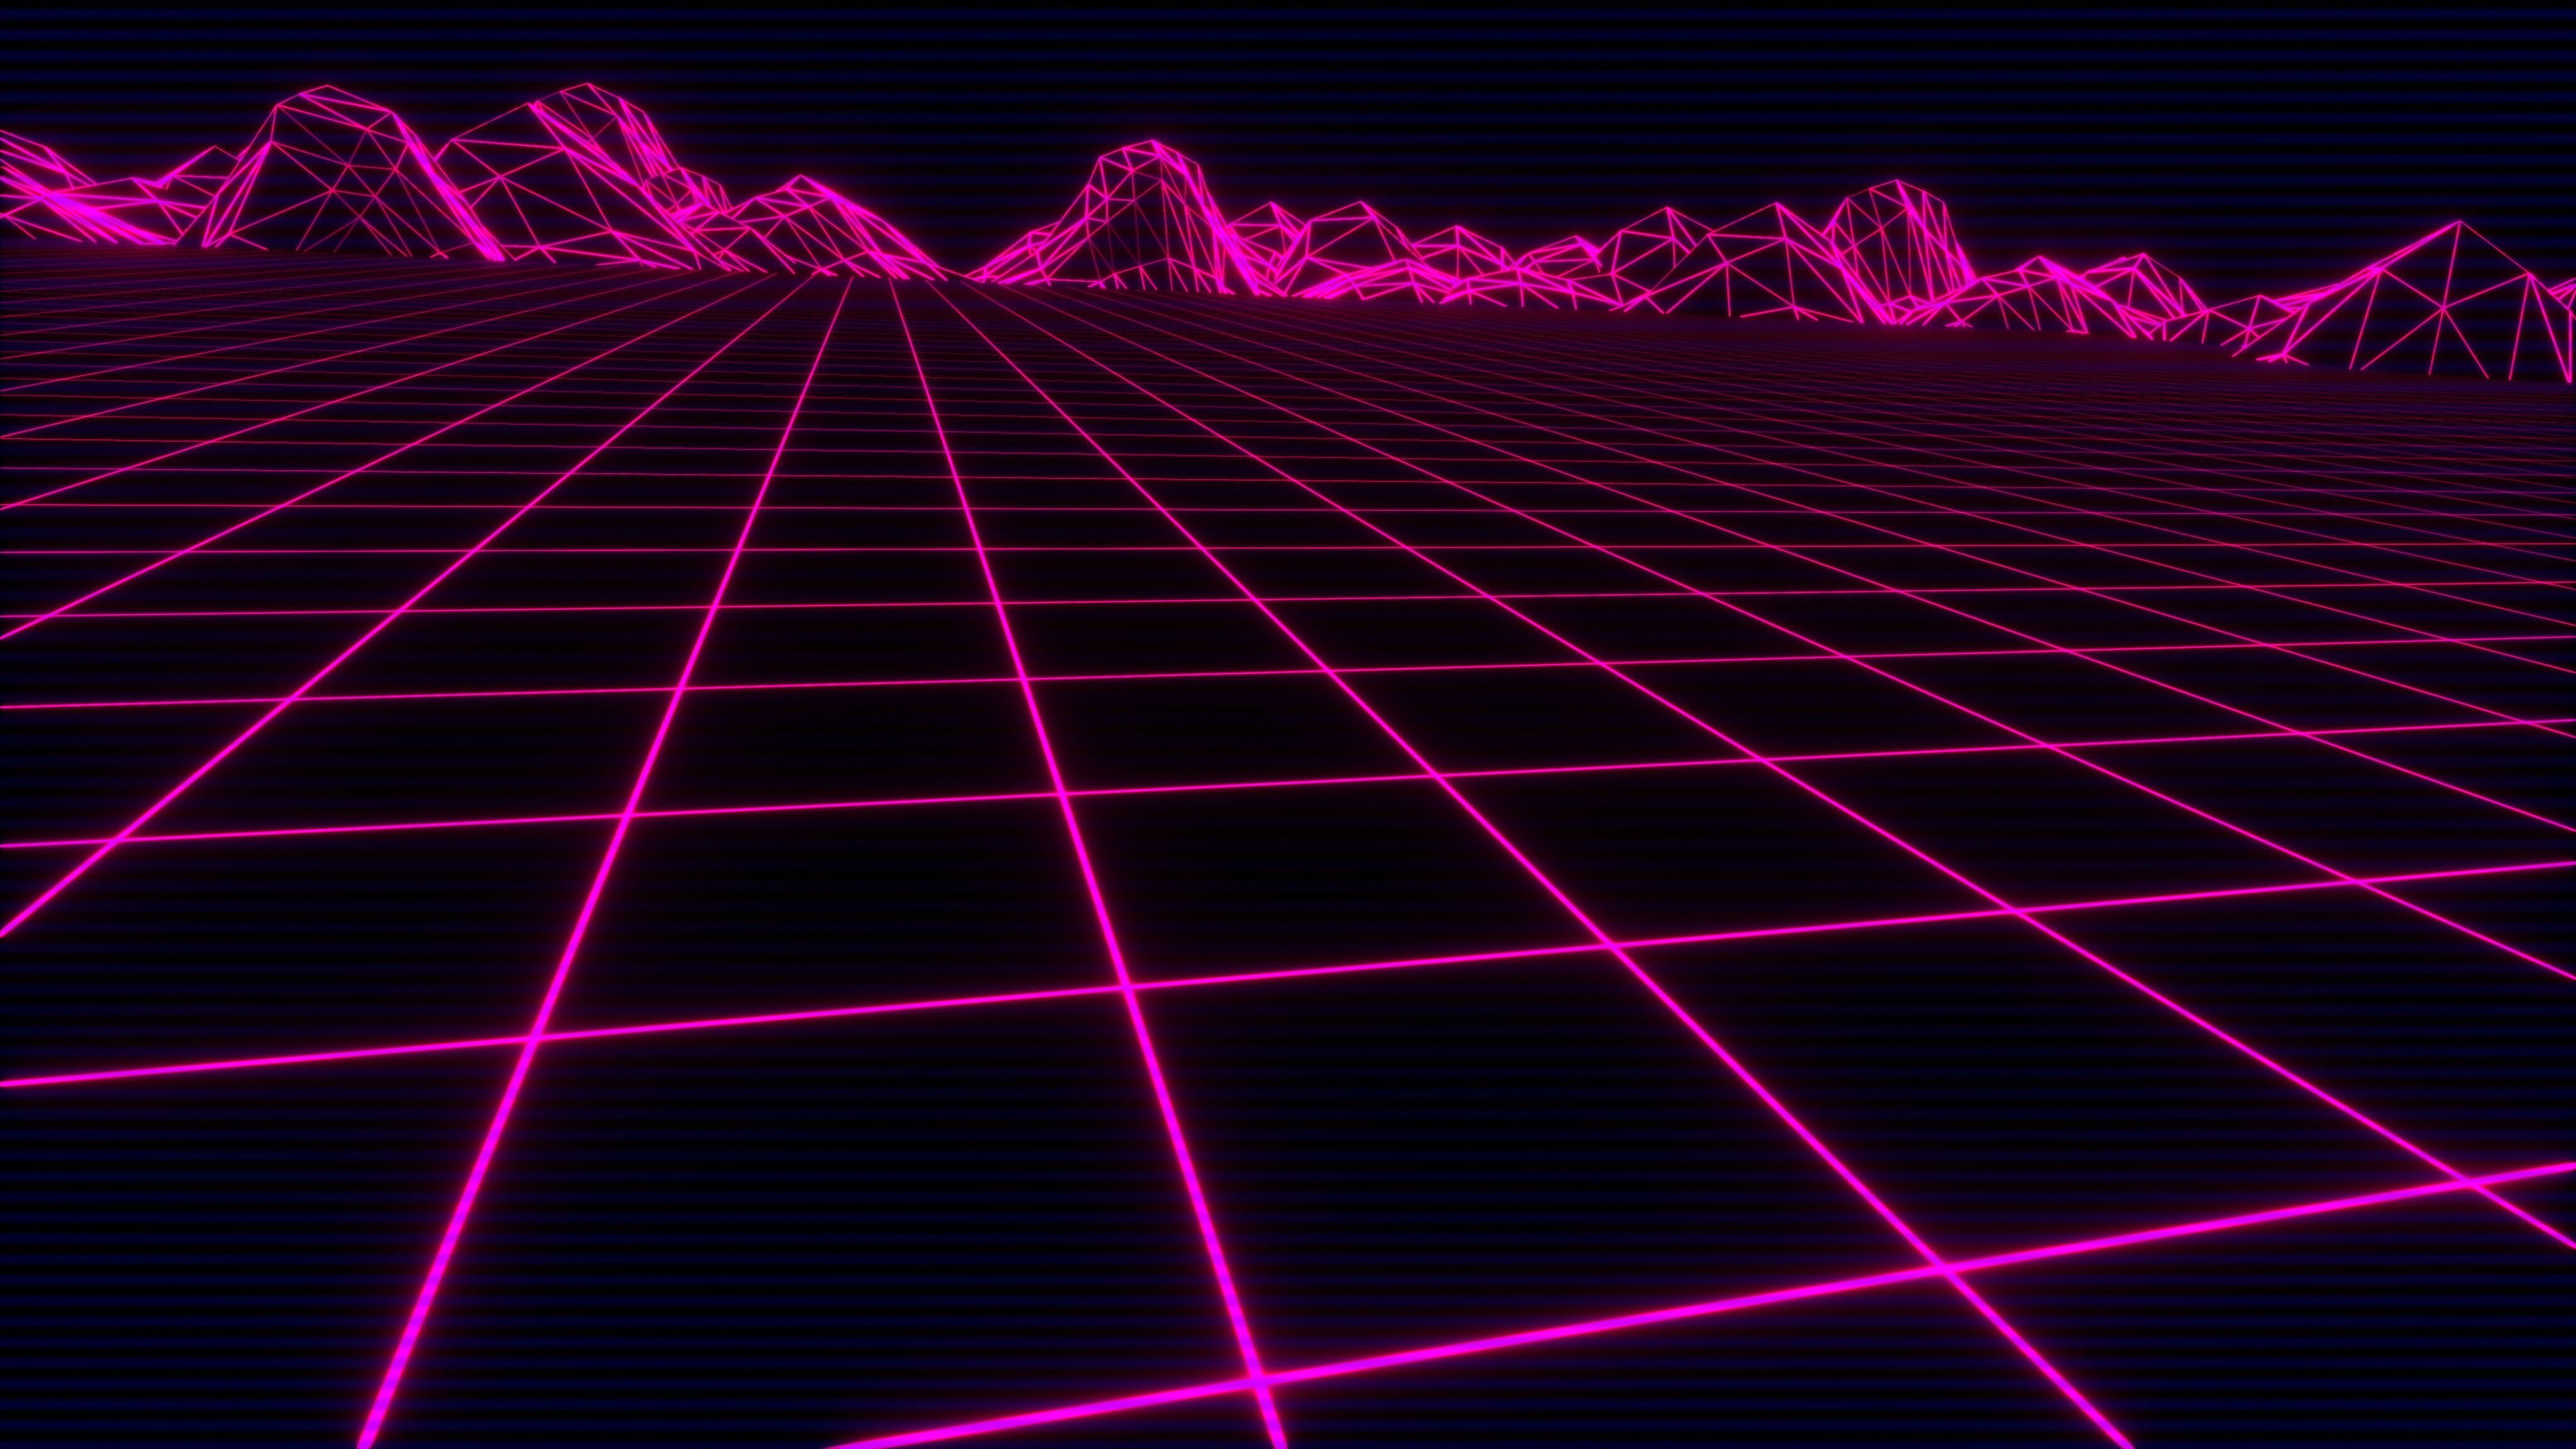 Background #Neon #VHS #Synth #Retrowave #Synthwave New Retro Wave #Futuresynth #Sintav #Retrouve #Outrun seamless animation. Retro waves, Synthwave, HD wallpaper